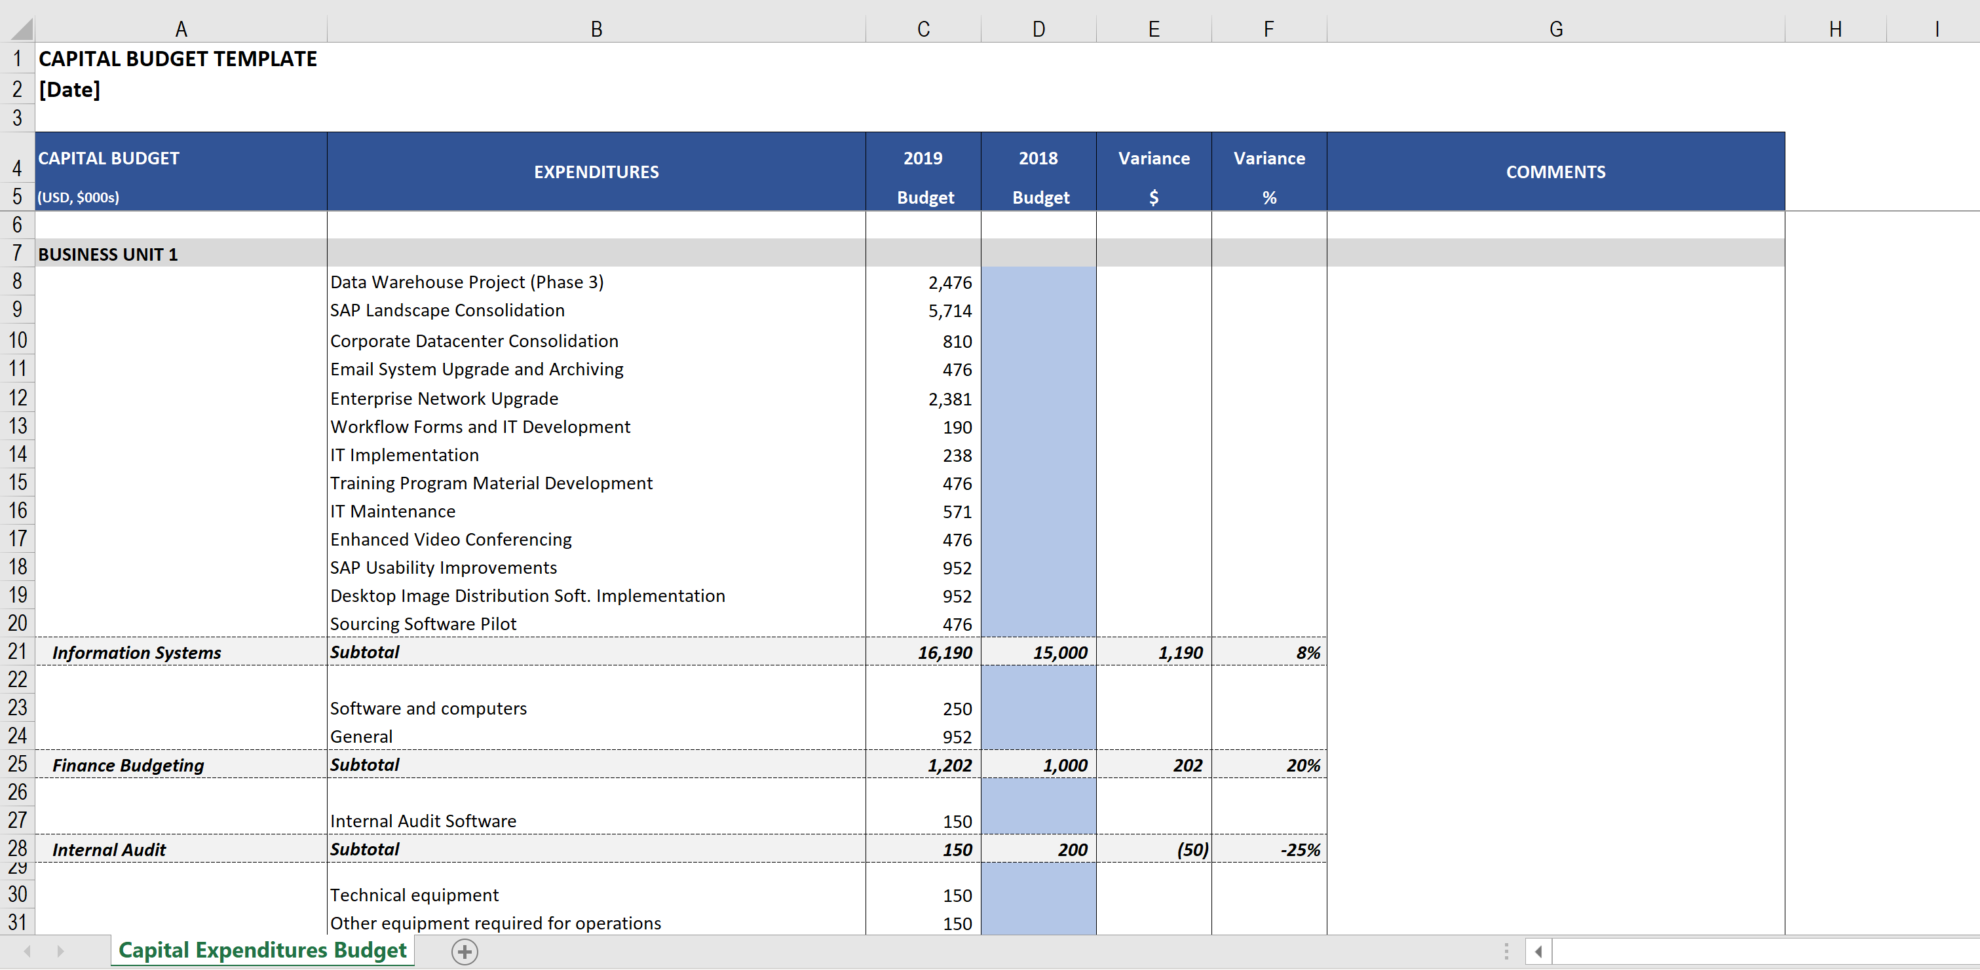 Capital Expenditure Report Template 8132